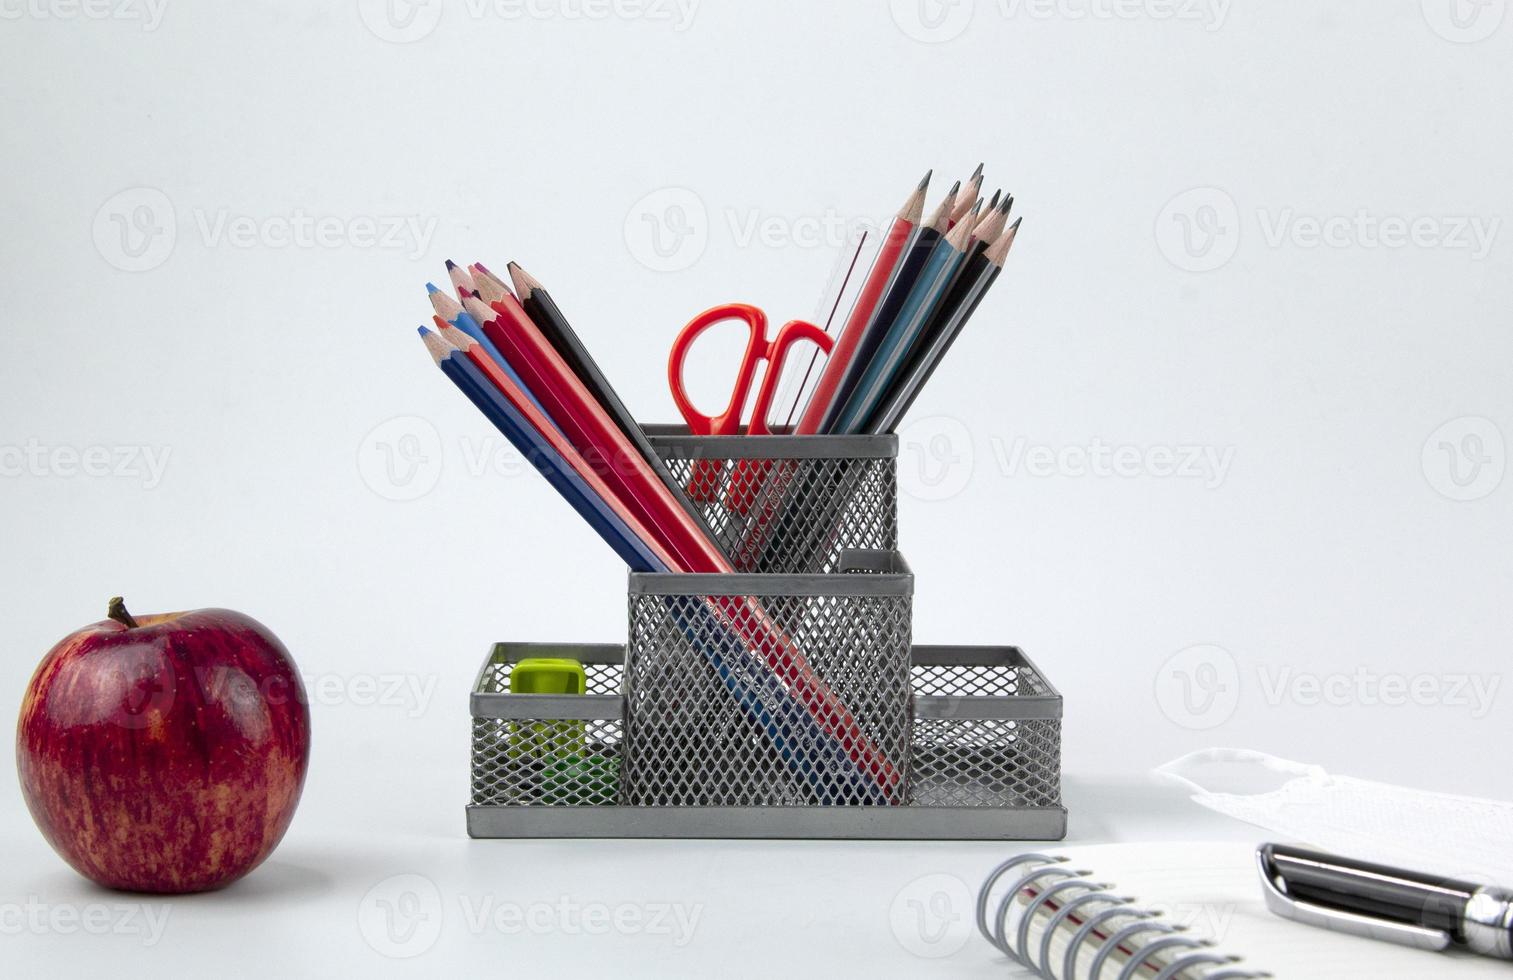 Education elements concepts, color pencils, face mask, paper clips, scissors, ruler, apple isolated on white background. Back to school poster design photo